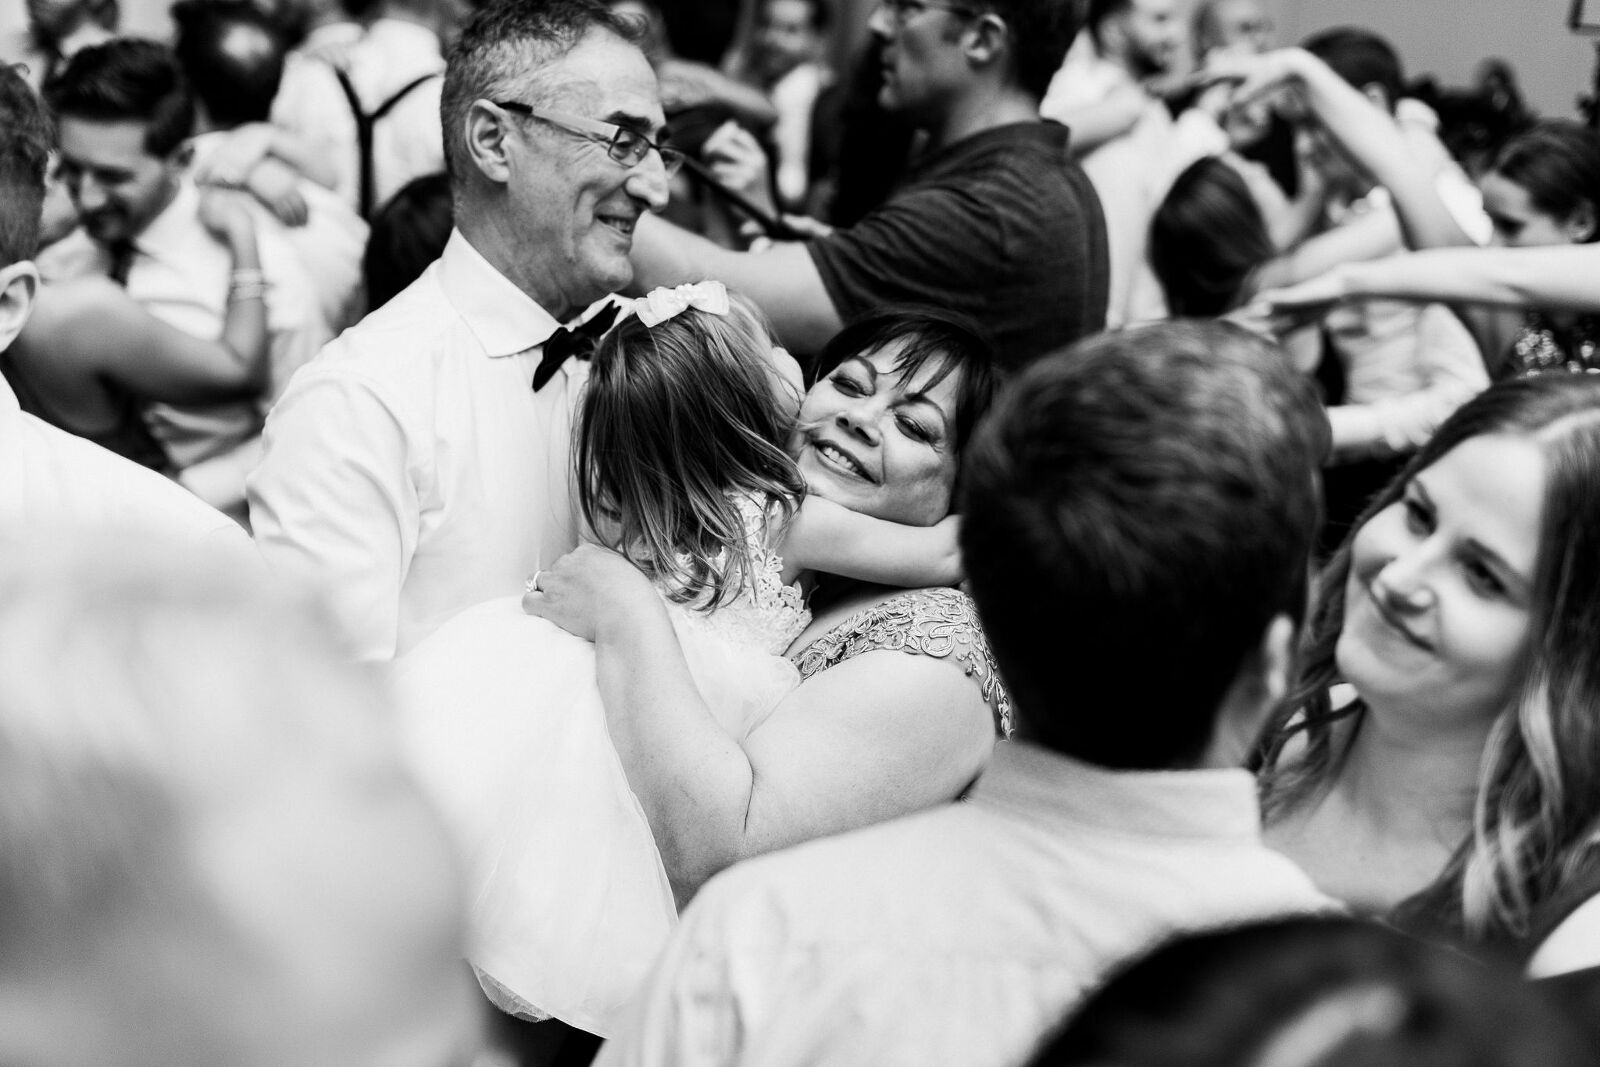 Grandmother hugs granddaughter in the middle of the dance floor surrounded by people